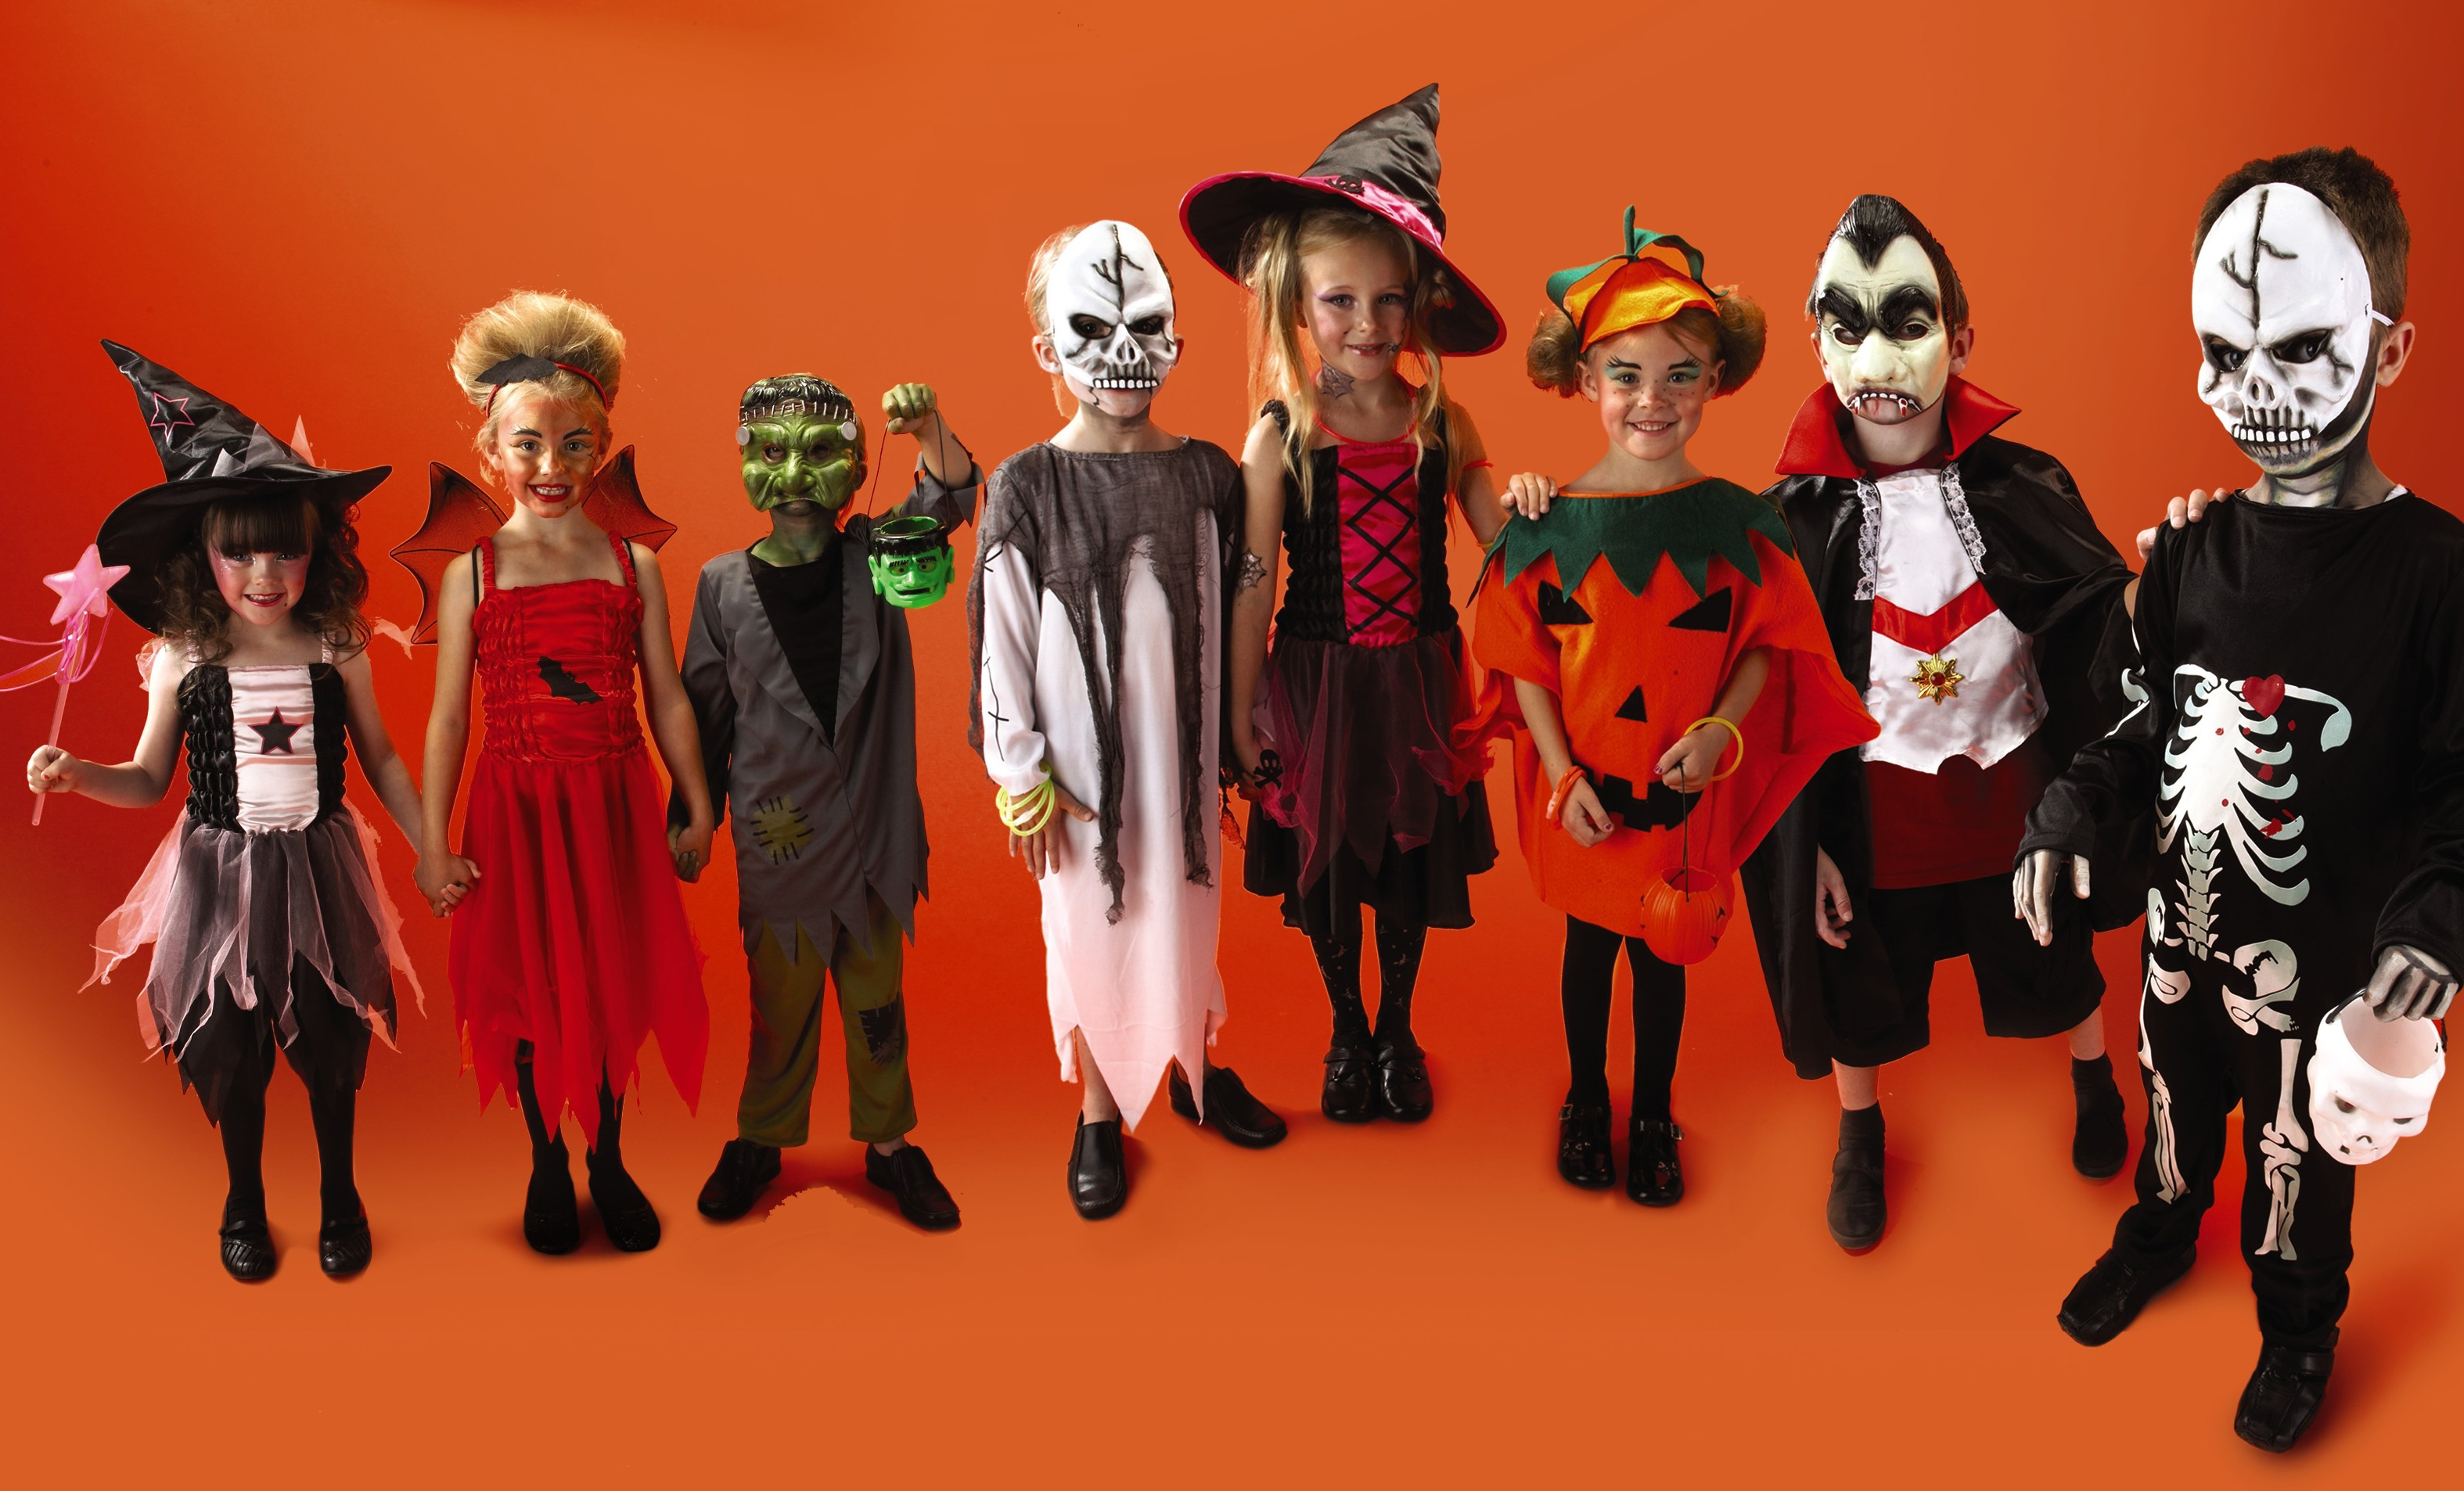 How to make funny Halloween slideshow with Halloween Photos and Videos